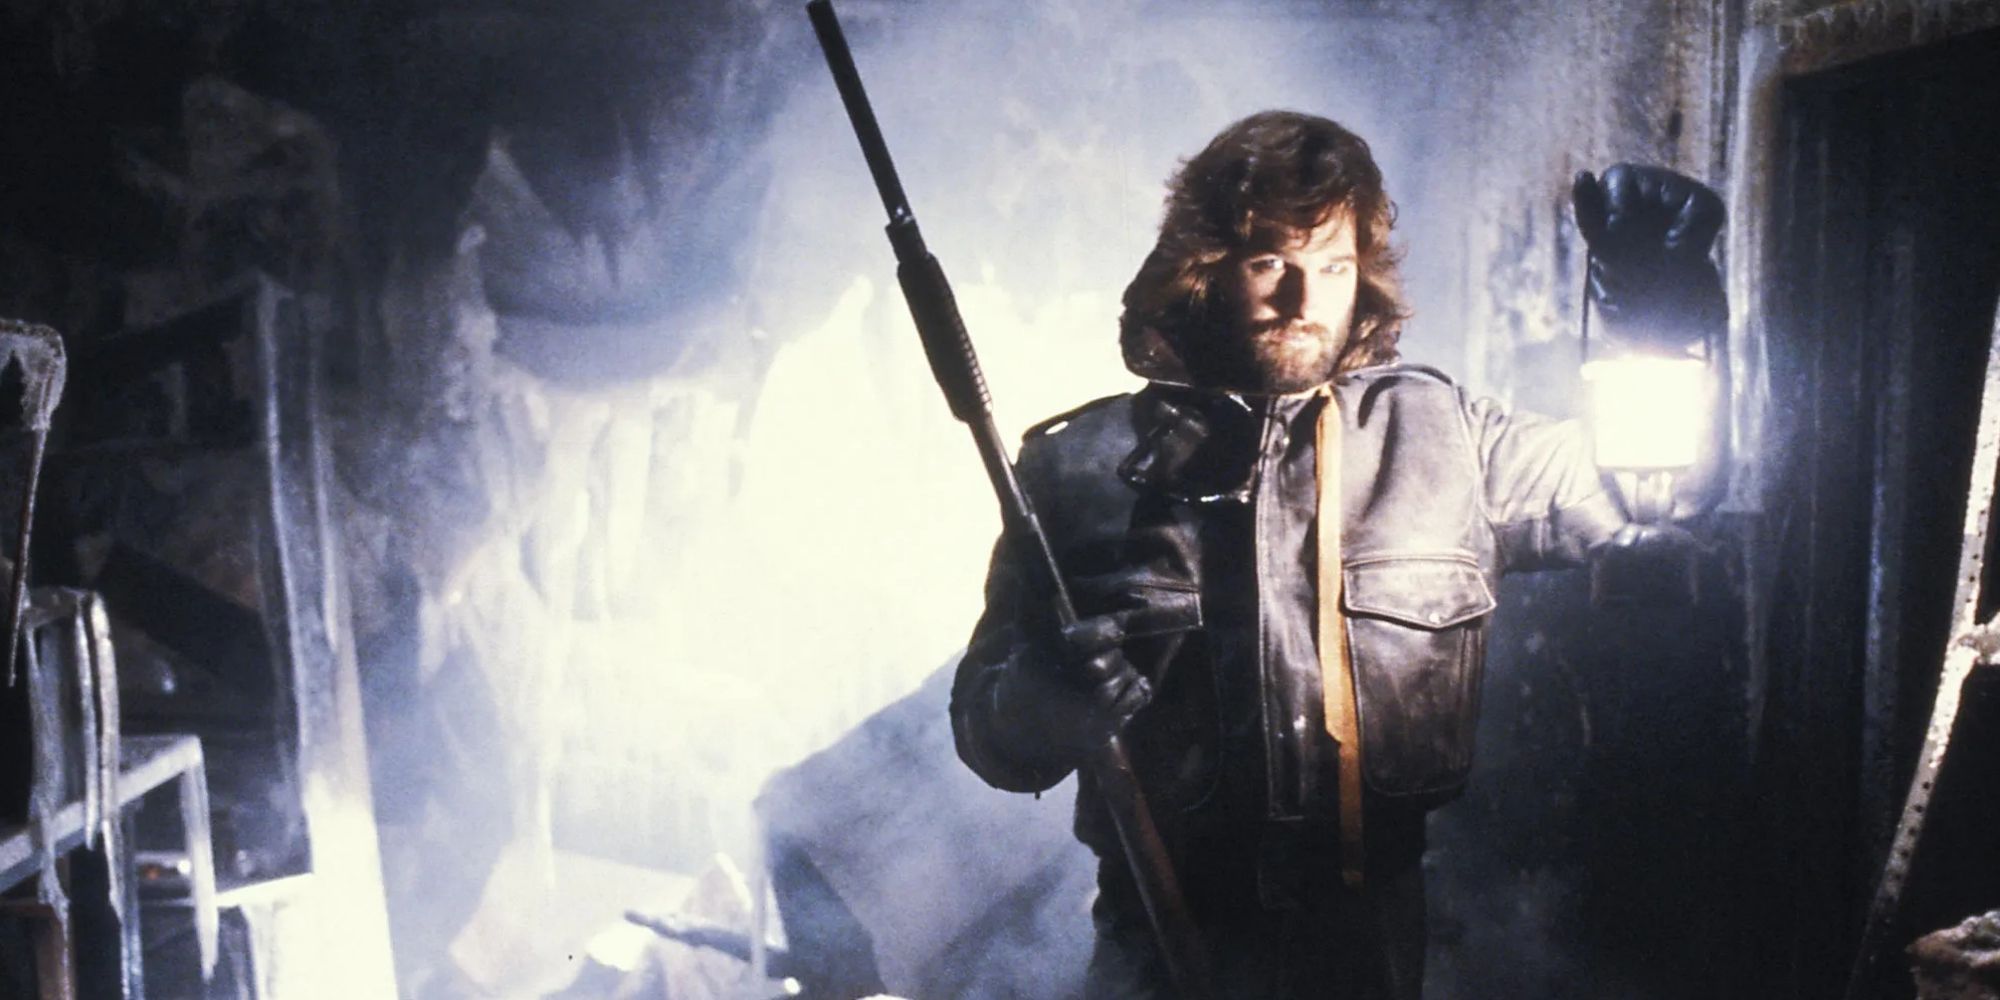 Sorry John Carpenter, We Don’t Need a Sequel to ‘The Thing’